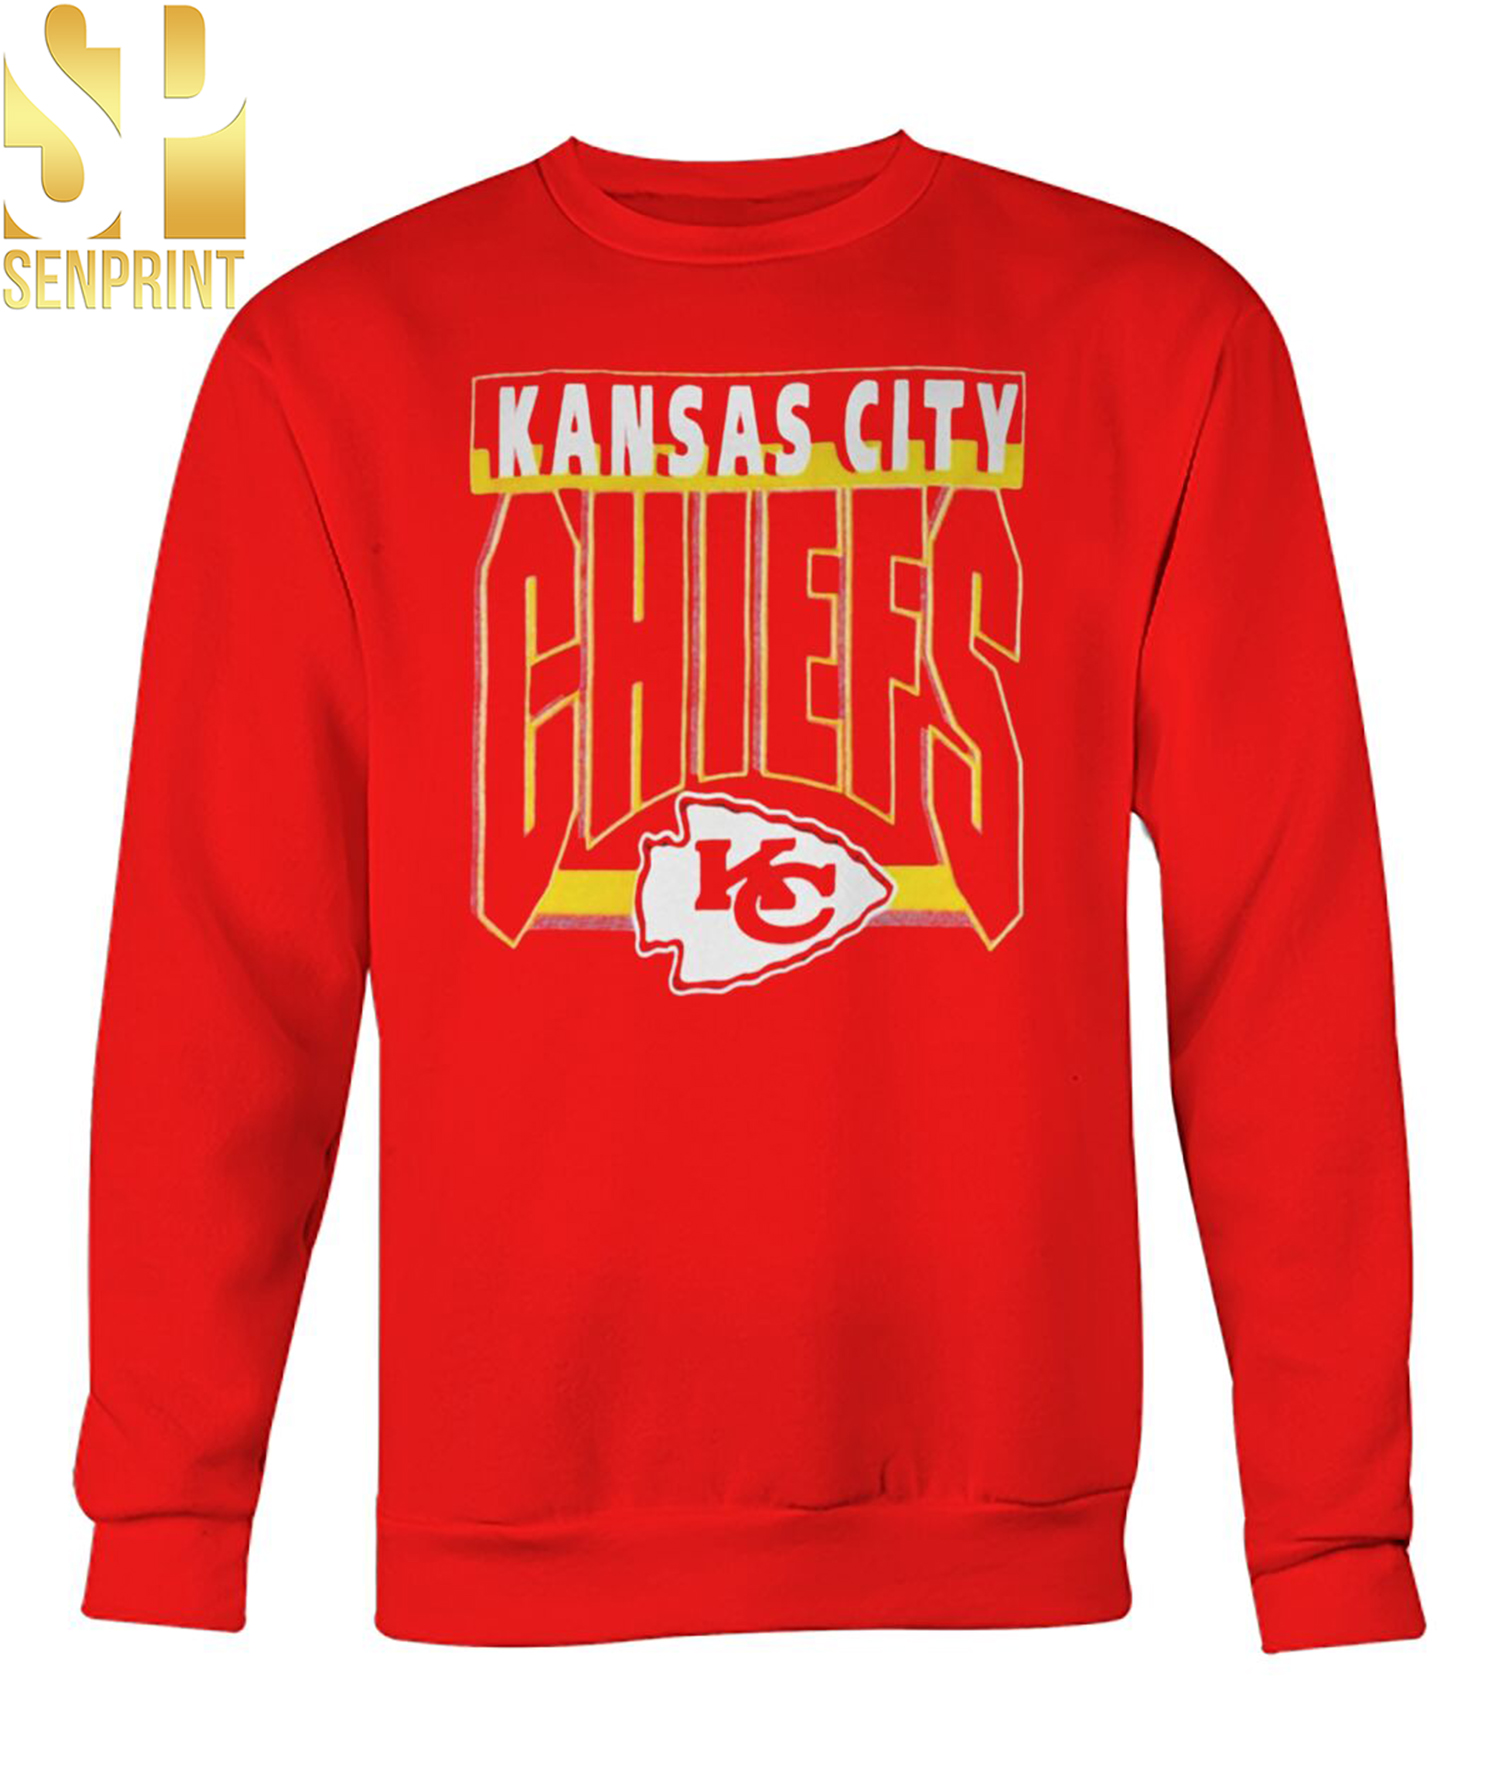 Taylor Swift’s Kansas City Chiefs vs Los Angeles Chargers Game Day Outfit Sweatshirt